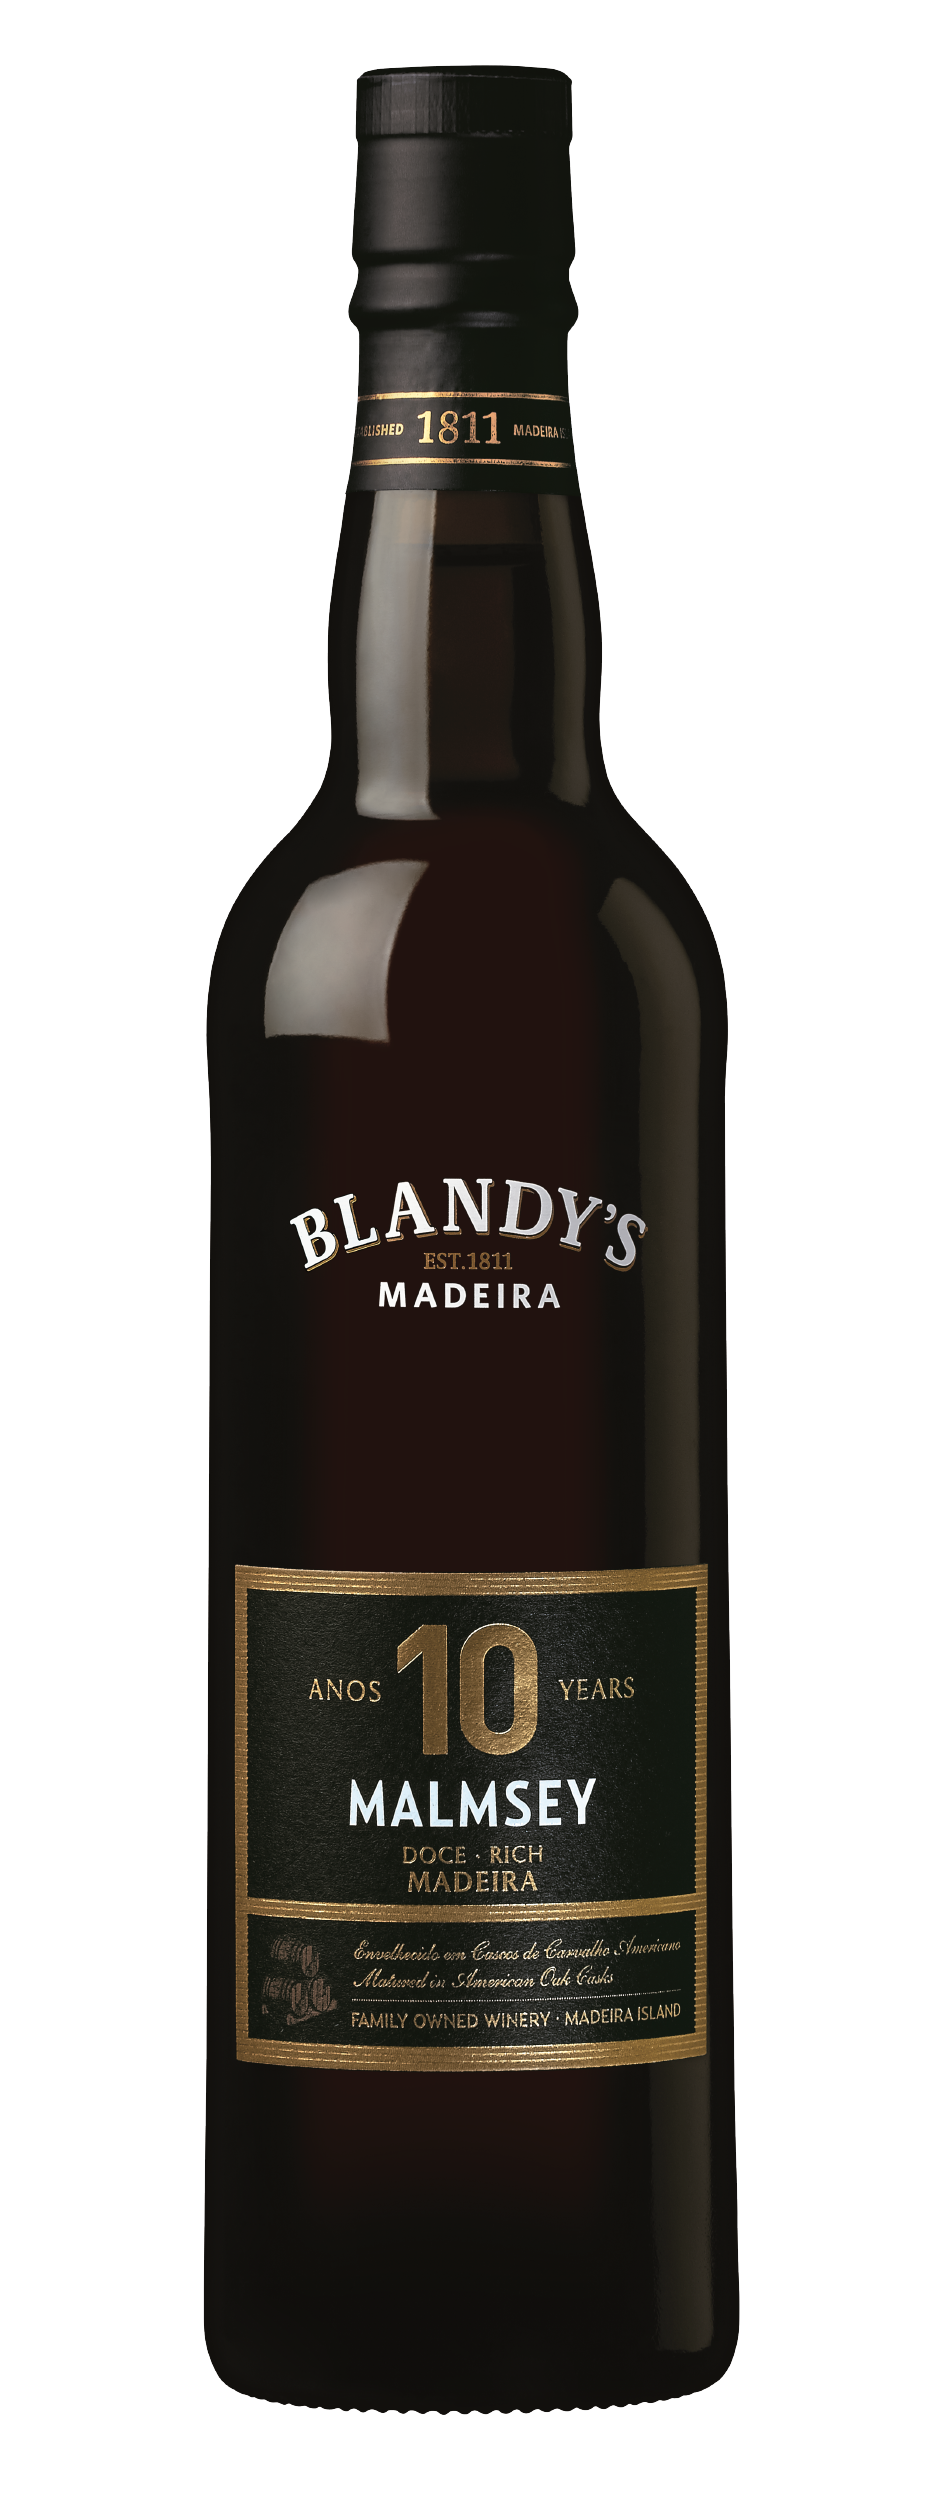 Product Image for BLANDY'S MALMSEY 10 YEAR OLD